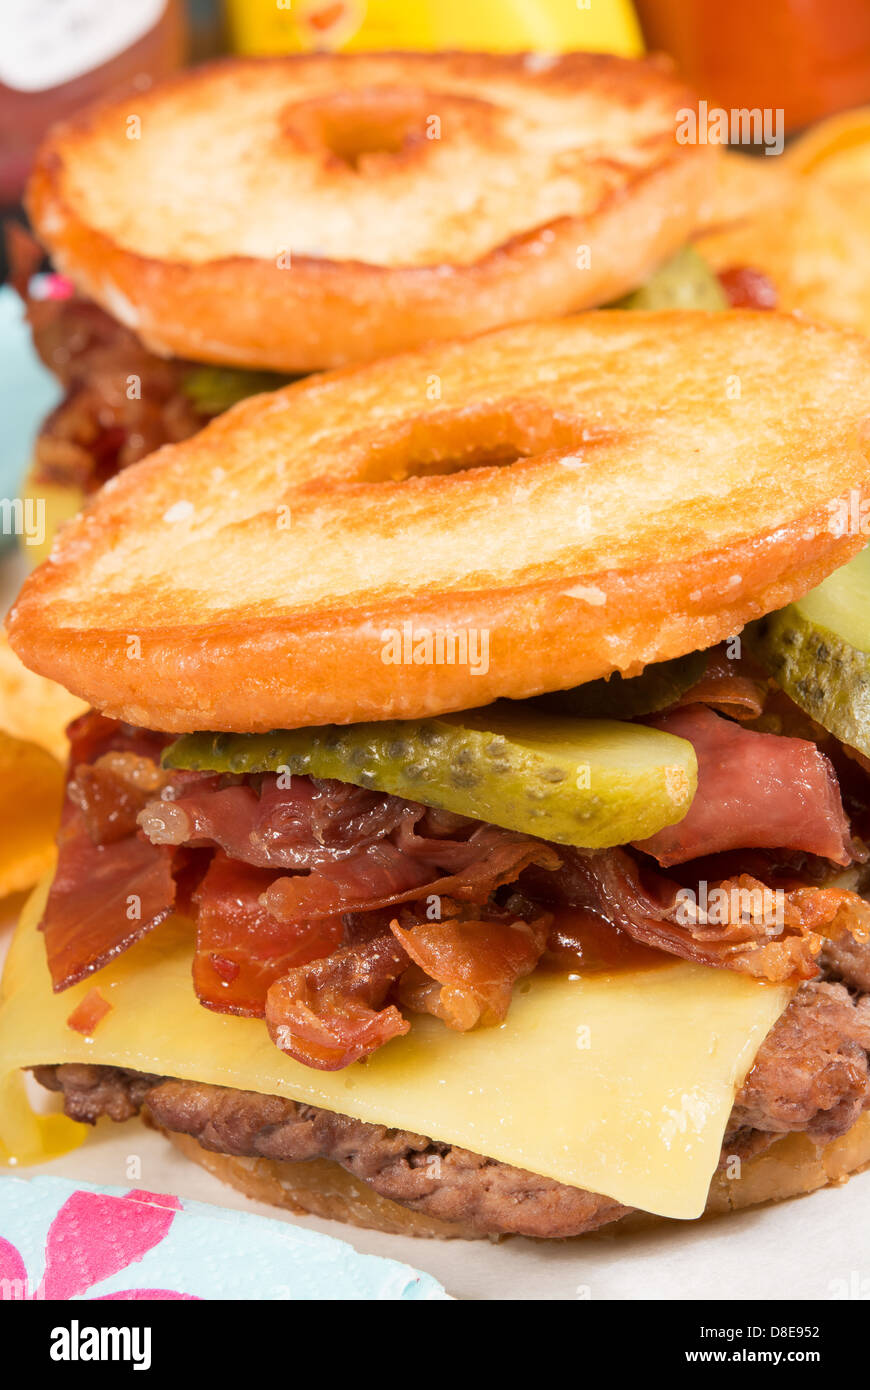 The Luther burger: a beef patty, cheese, crispy bacon and gherkins between two halves of a glazed ring doughnut. Stock Photo